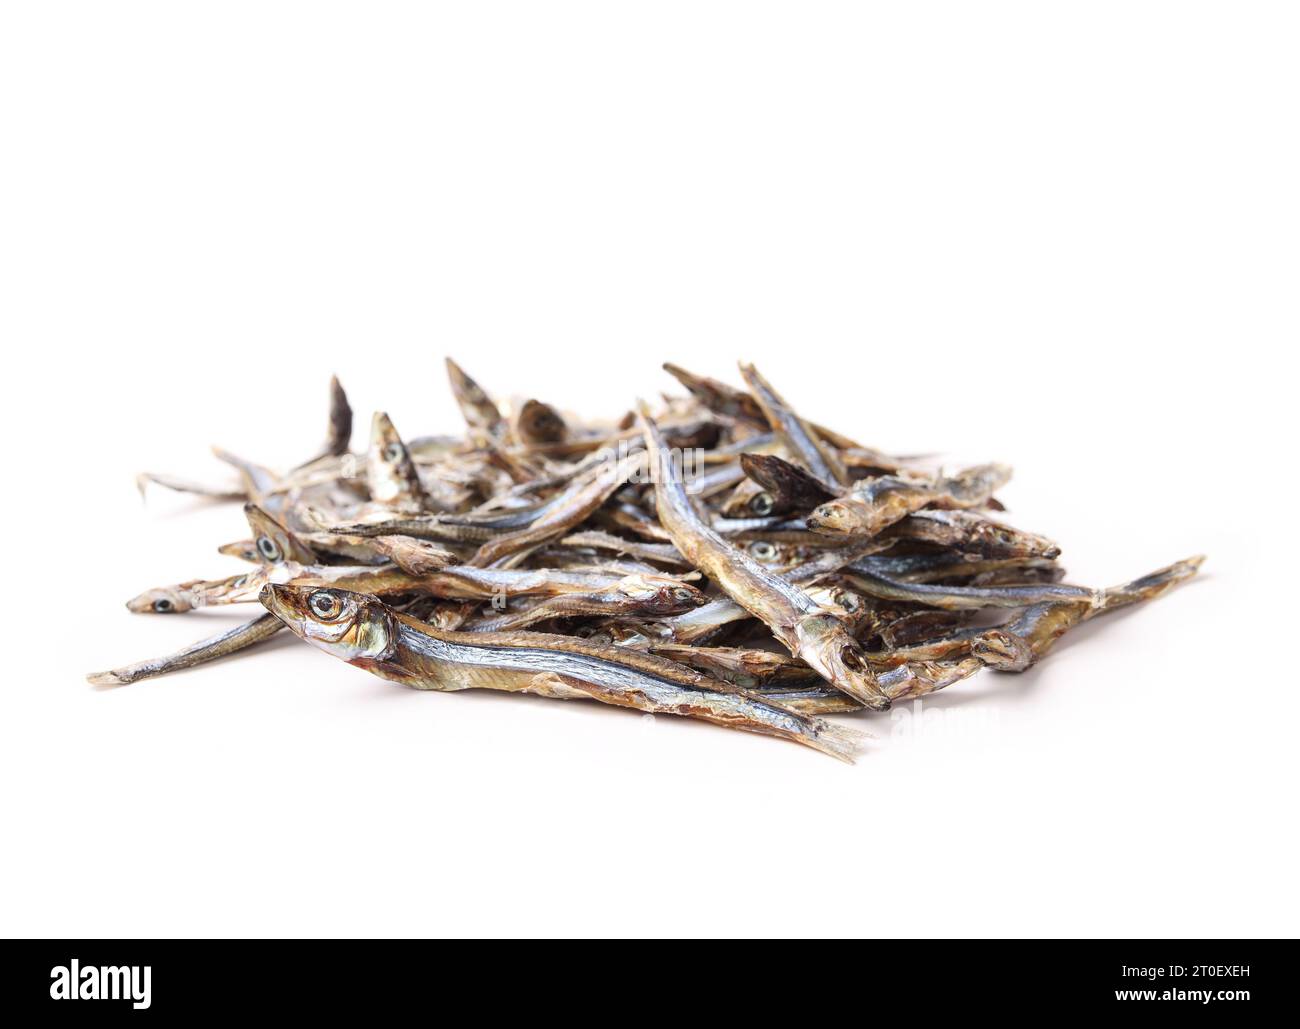 Pile of dried sardines for dogs and cats for treats. Many dehydrated fishes in multiple sizes. Healthy dog snack or health supplement rich on protein, Stock Photo